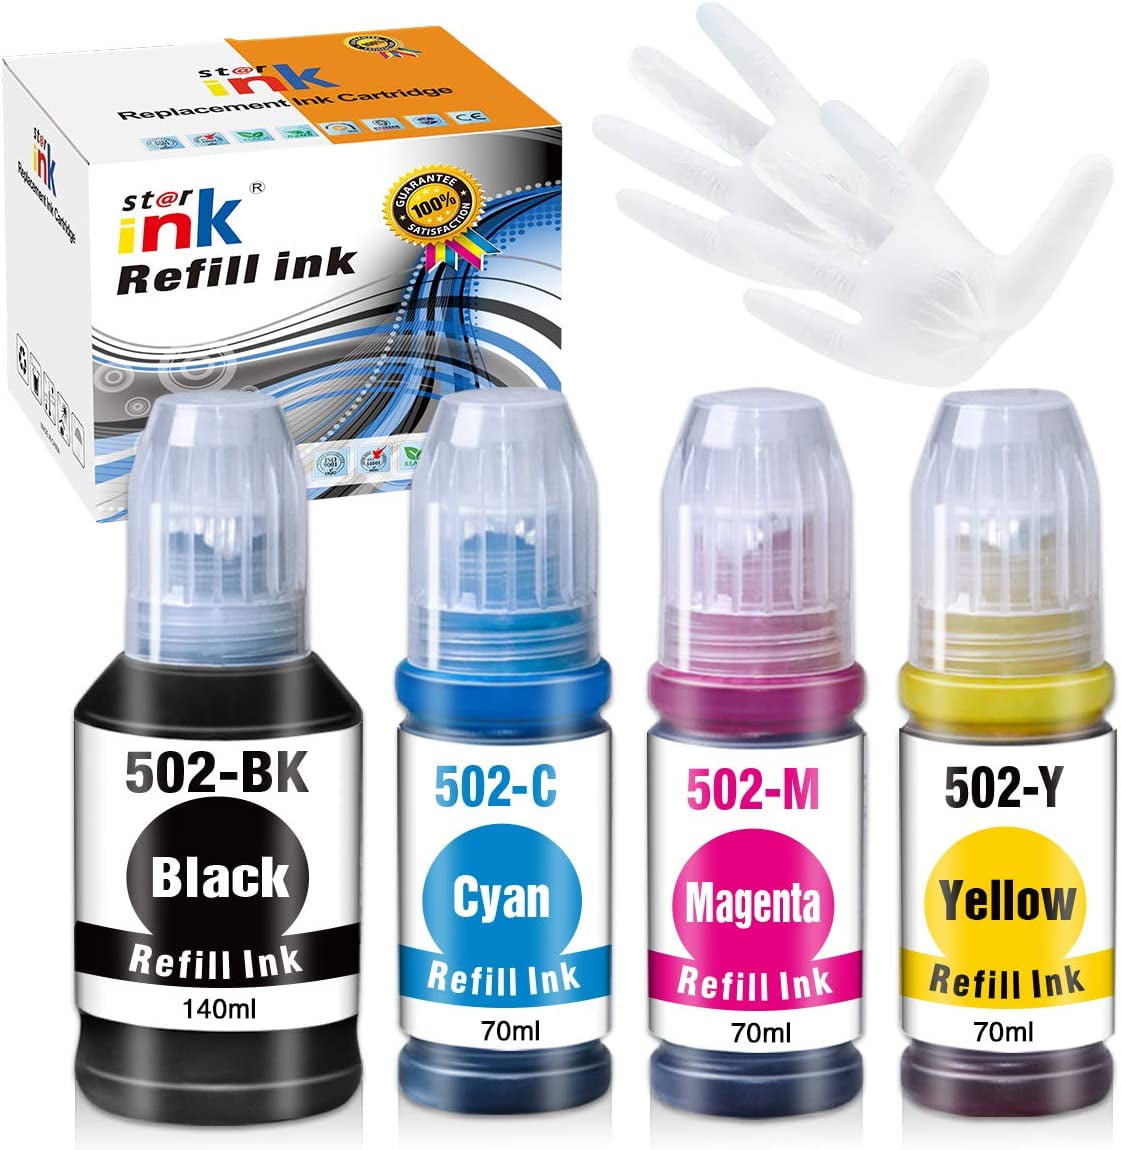 502 High Yield Refill Ink Bottles (4-Pack, Black/Cyan/Magenta/Yellow) -  Lomenti Compatible T502 Replacement for Epson ET-3750 ET-3700 ET-2760  ET-2750